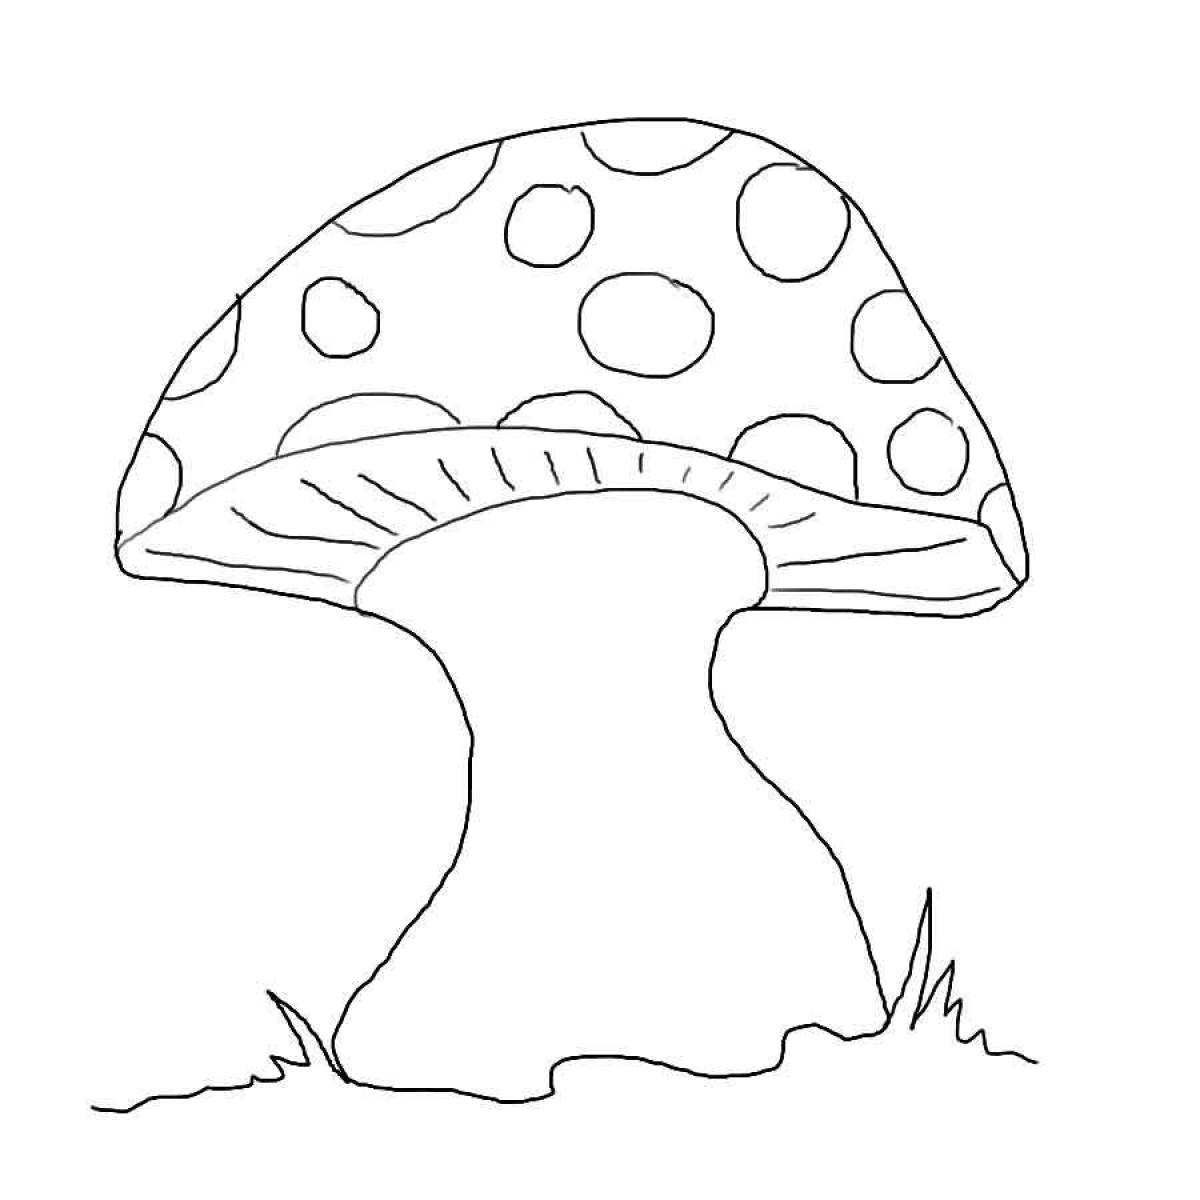 Mushroom coloring page with colorful splashes